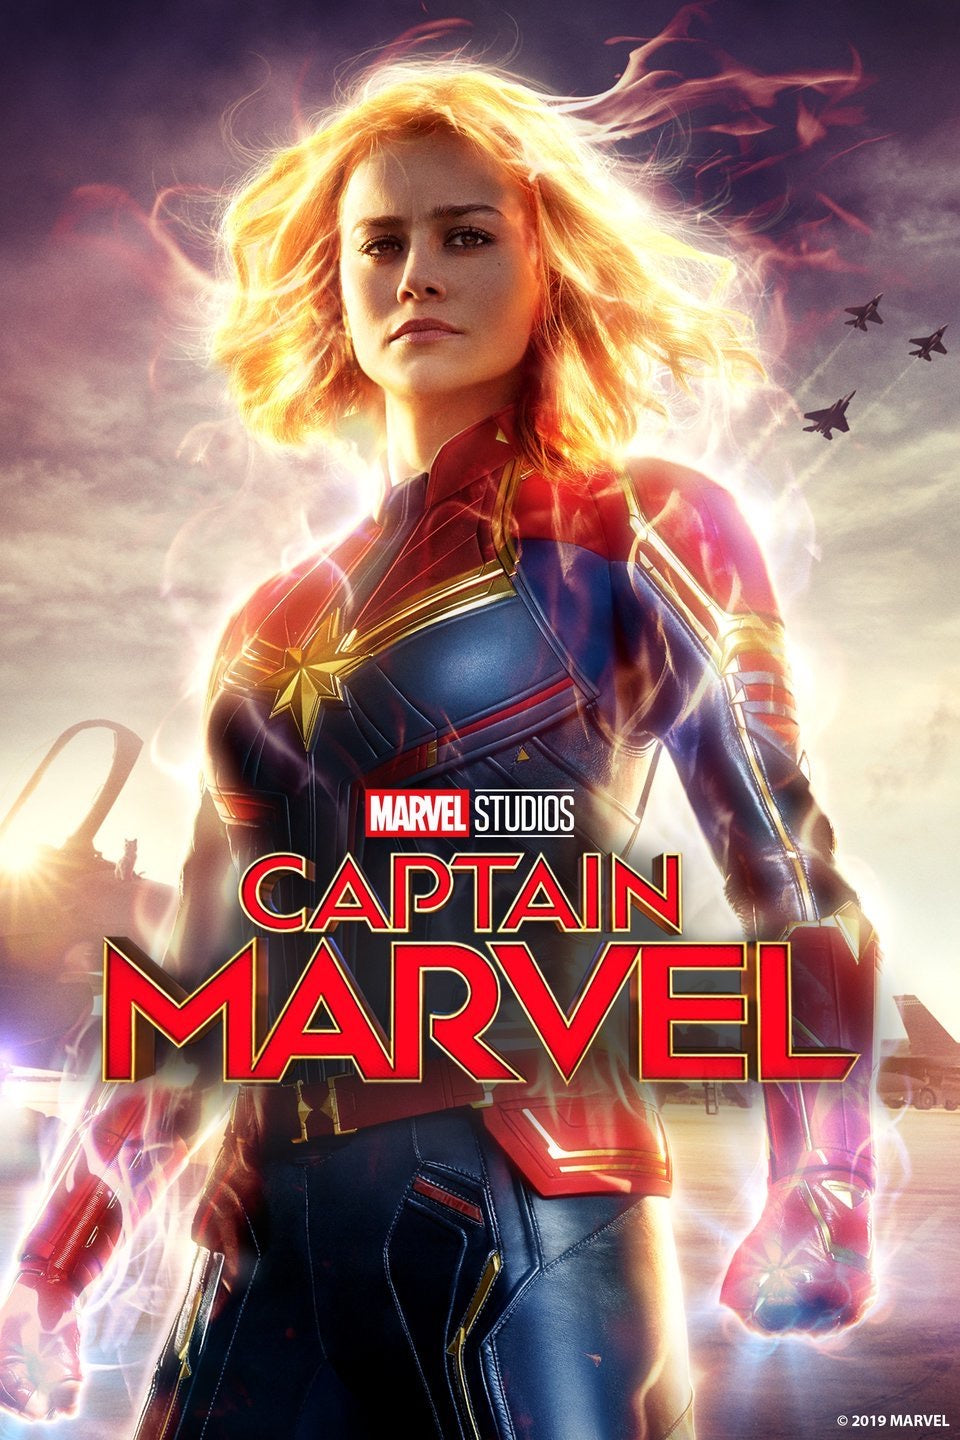 Captain Marvel (2019) Vudu or Movies Anywhere HD redemption only